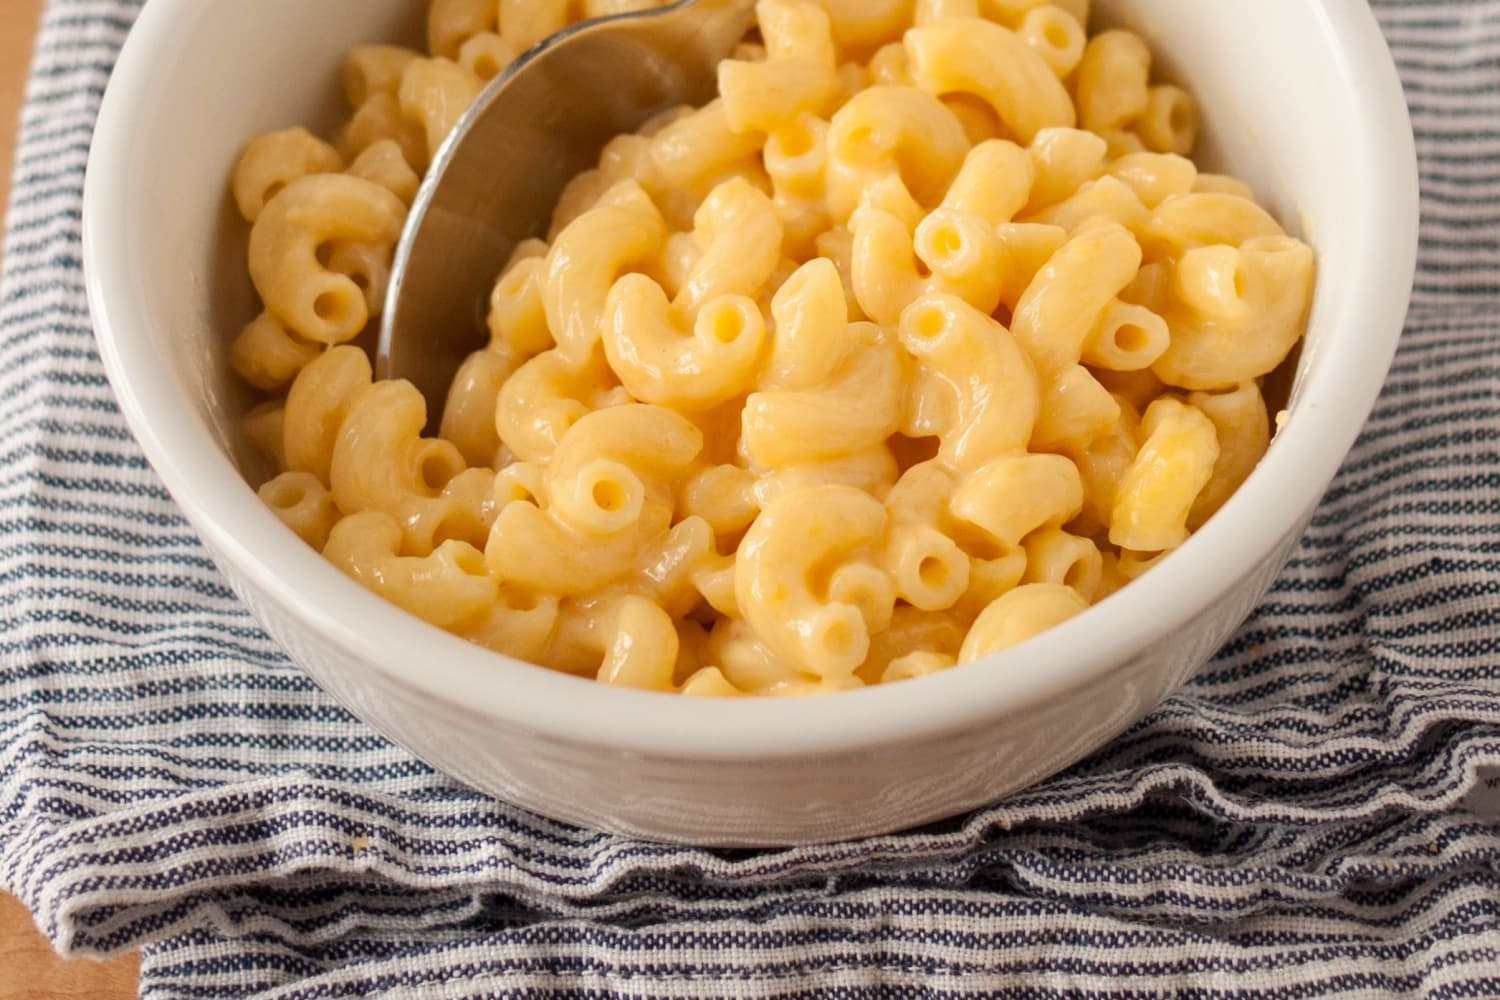 can i make boxed mac and cheese without milk